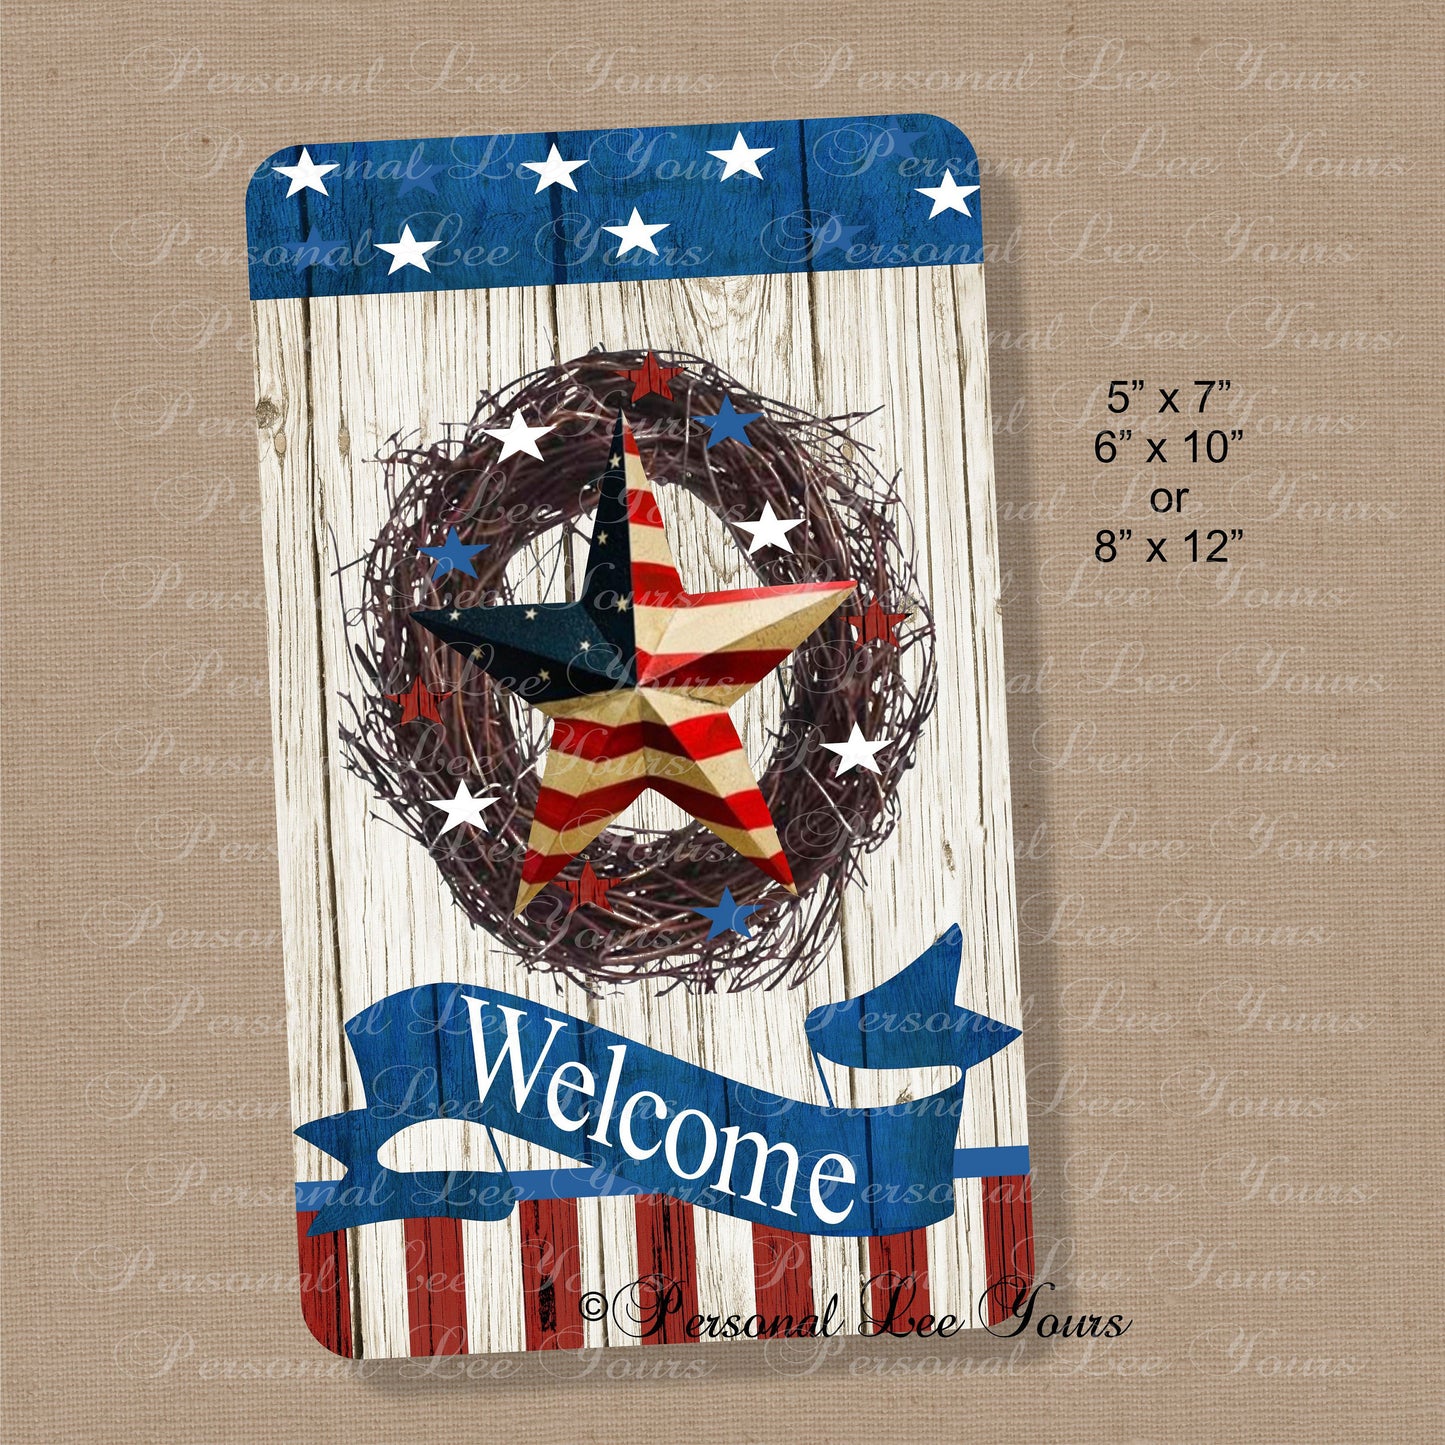 Patriotic Wreath Sign * American Welcome * 3 Sizes * Lightweight Metal